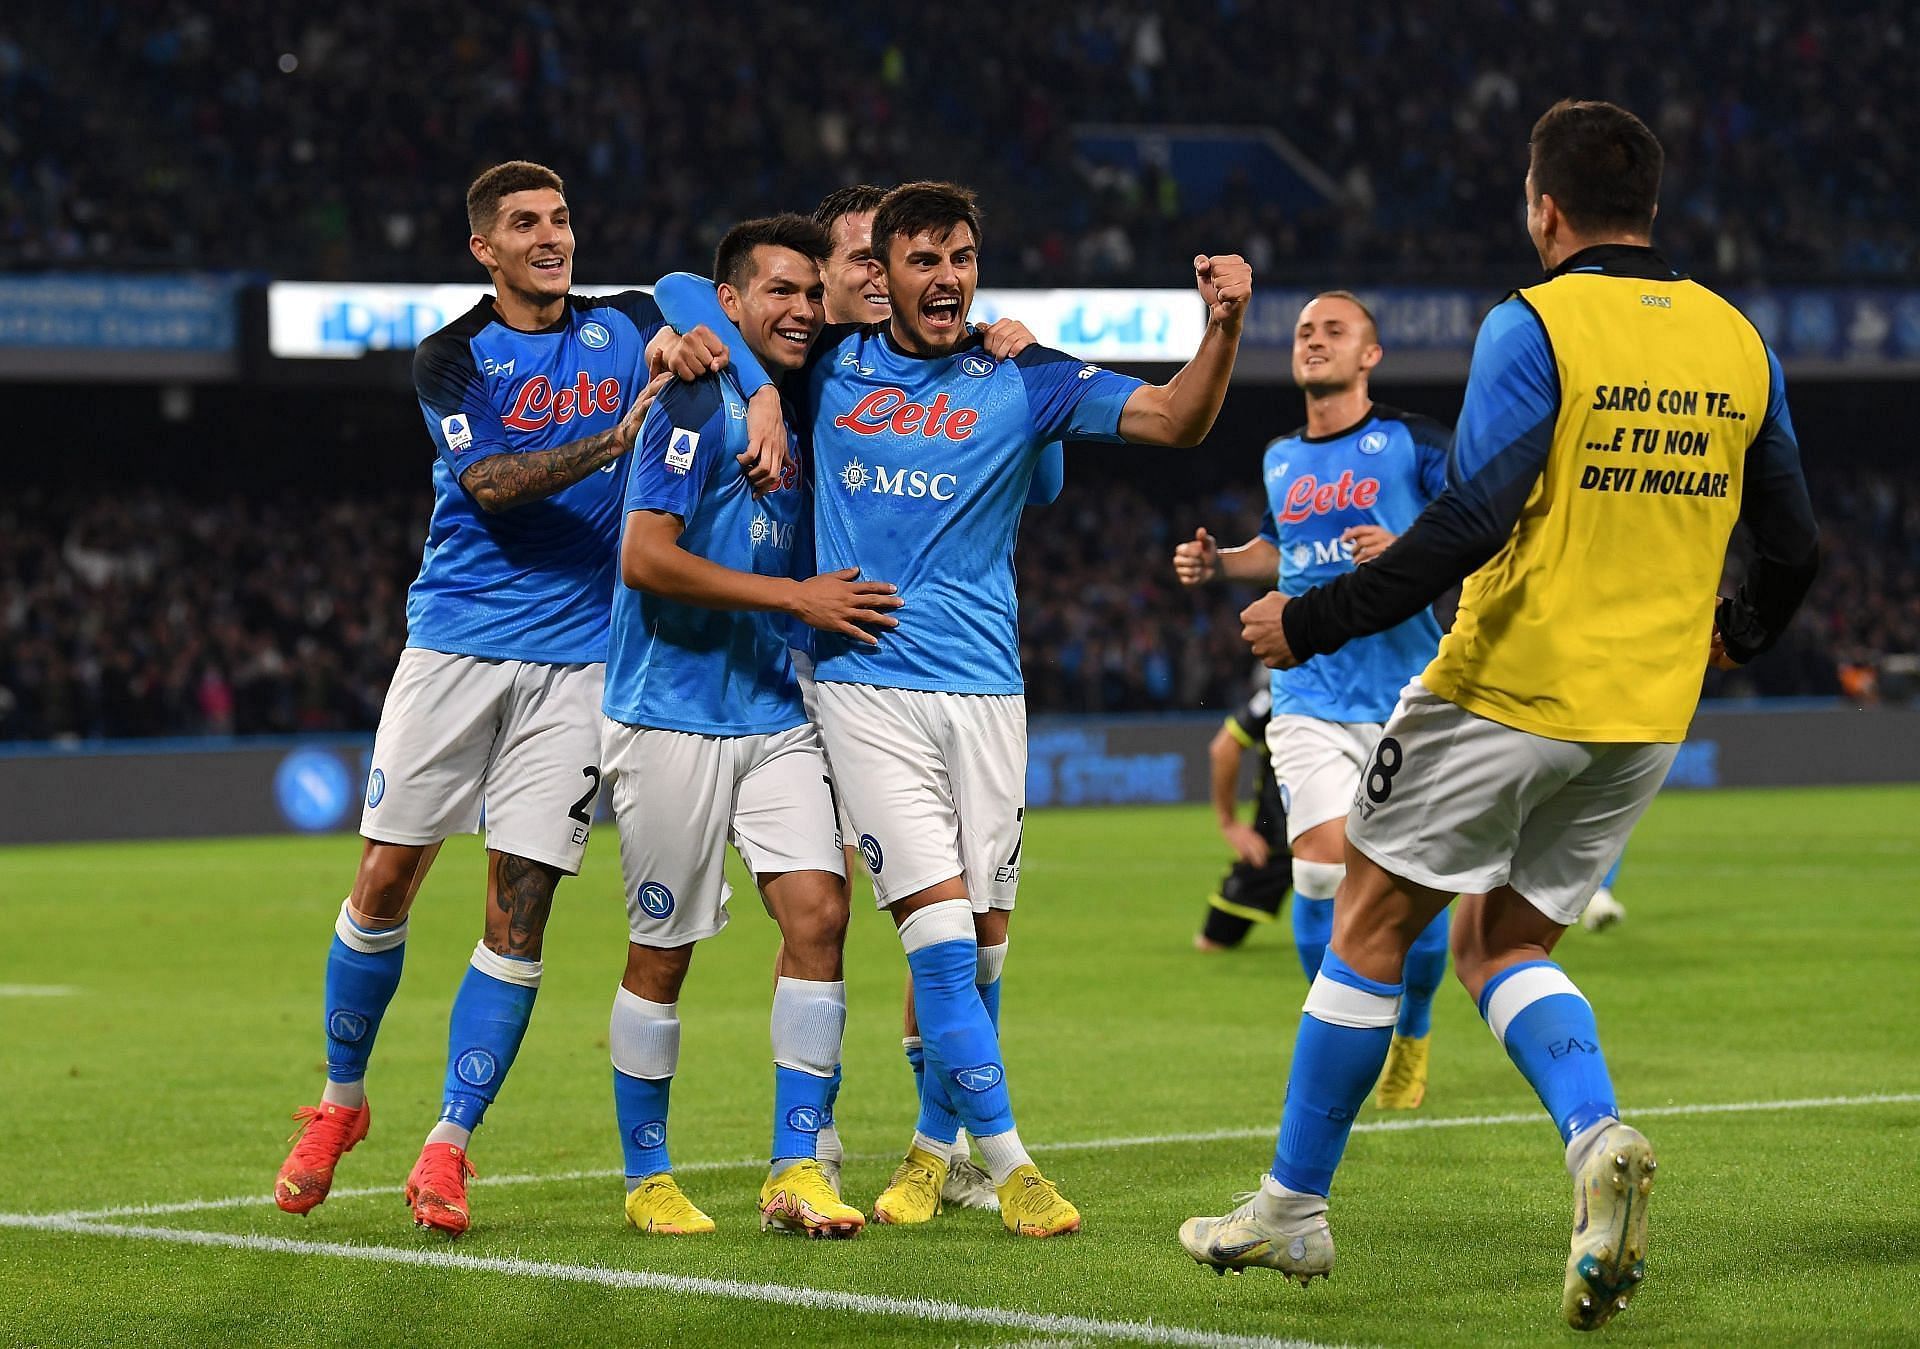 Napoli could spring a few surprises this season.